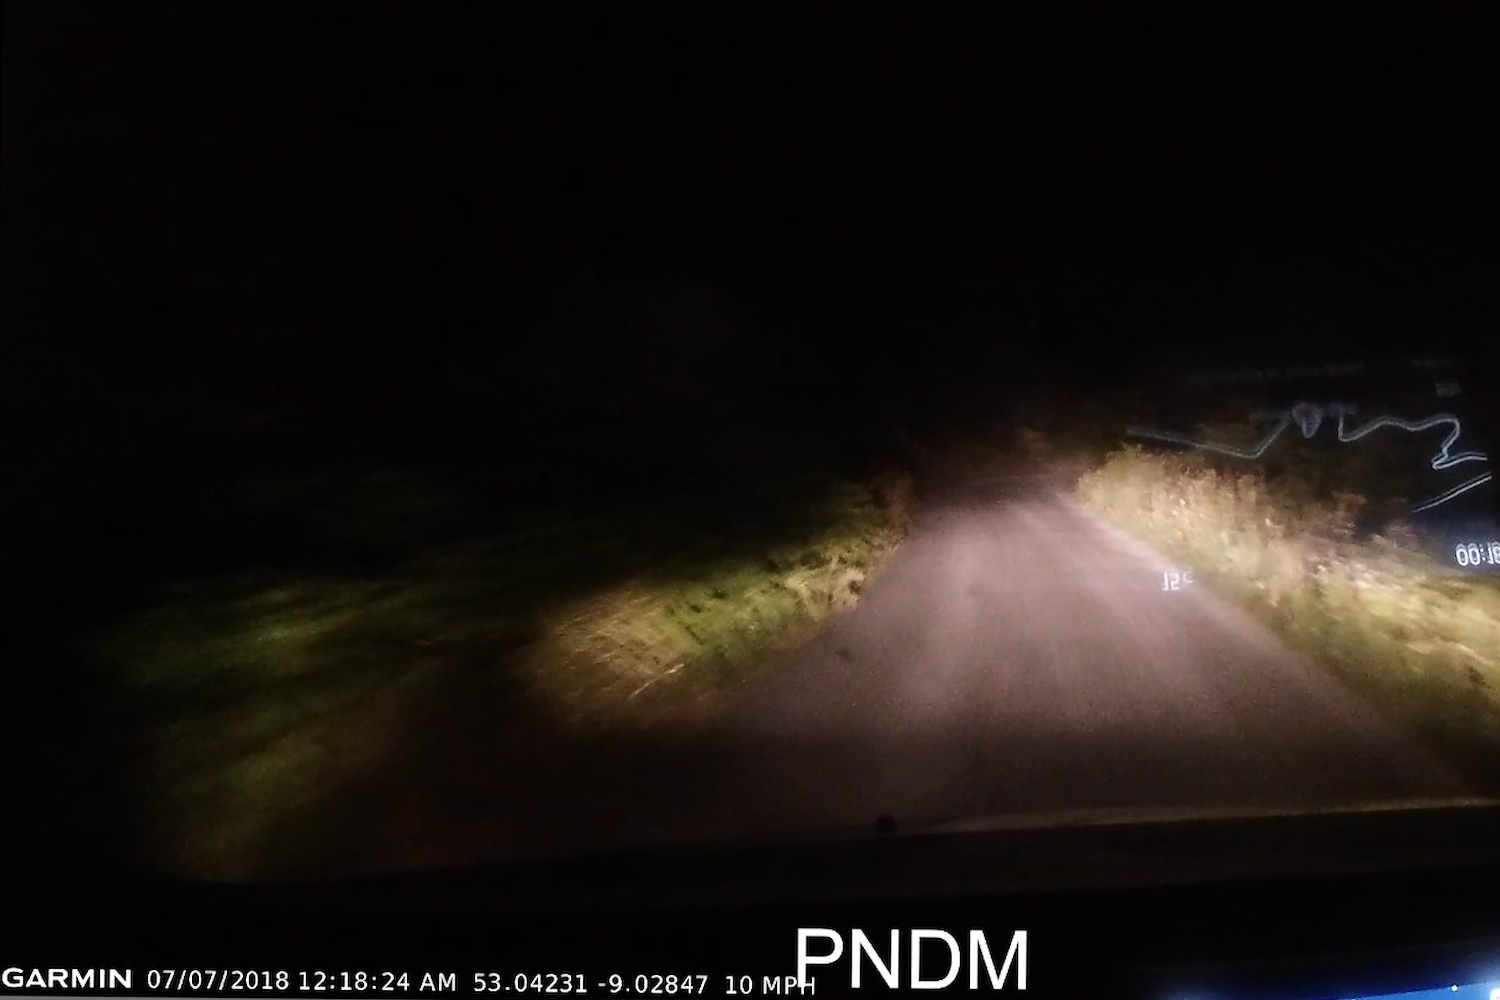 Footage from our dashcam at night, where the road is completely black except for the small area illuminated by our headlights